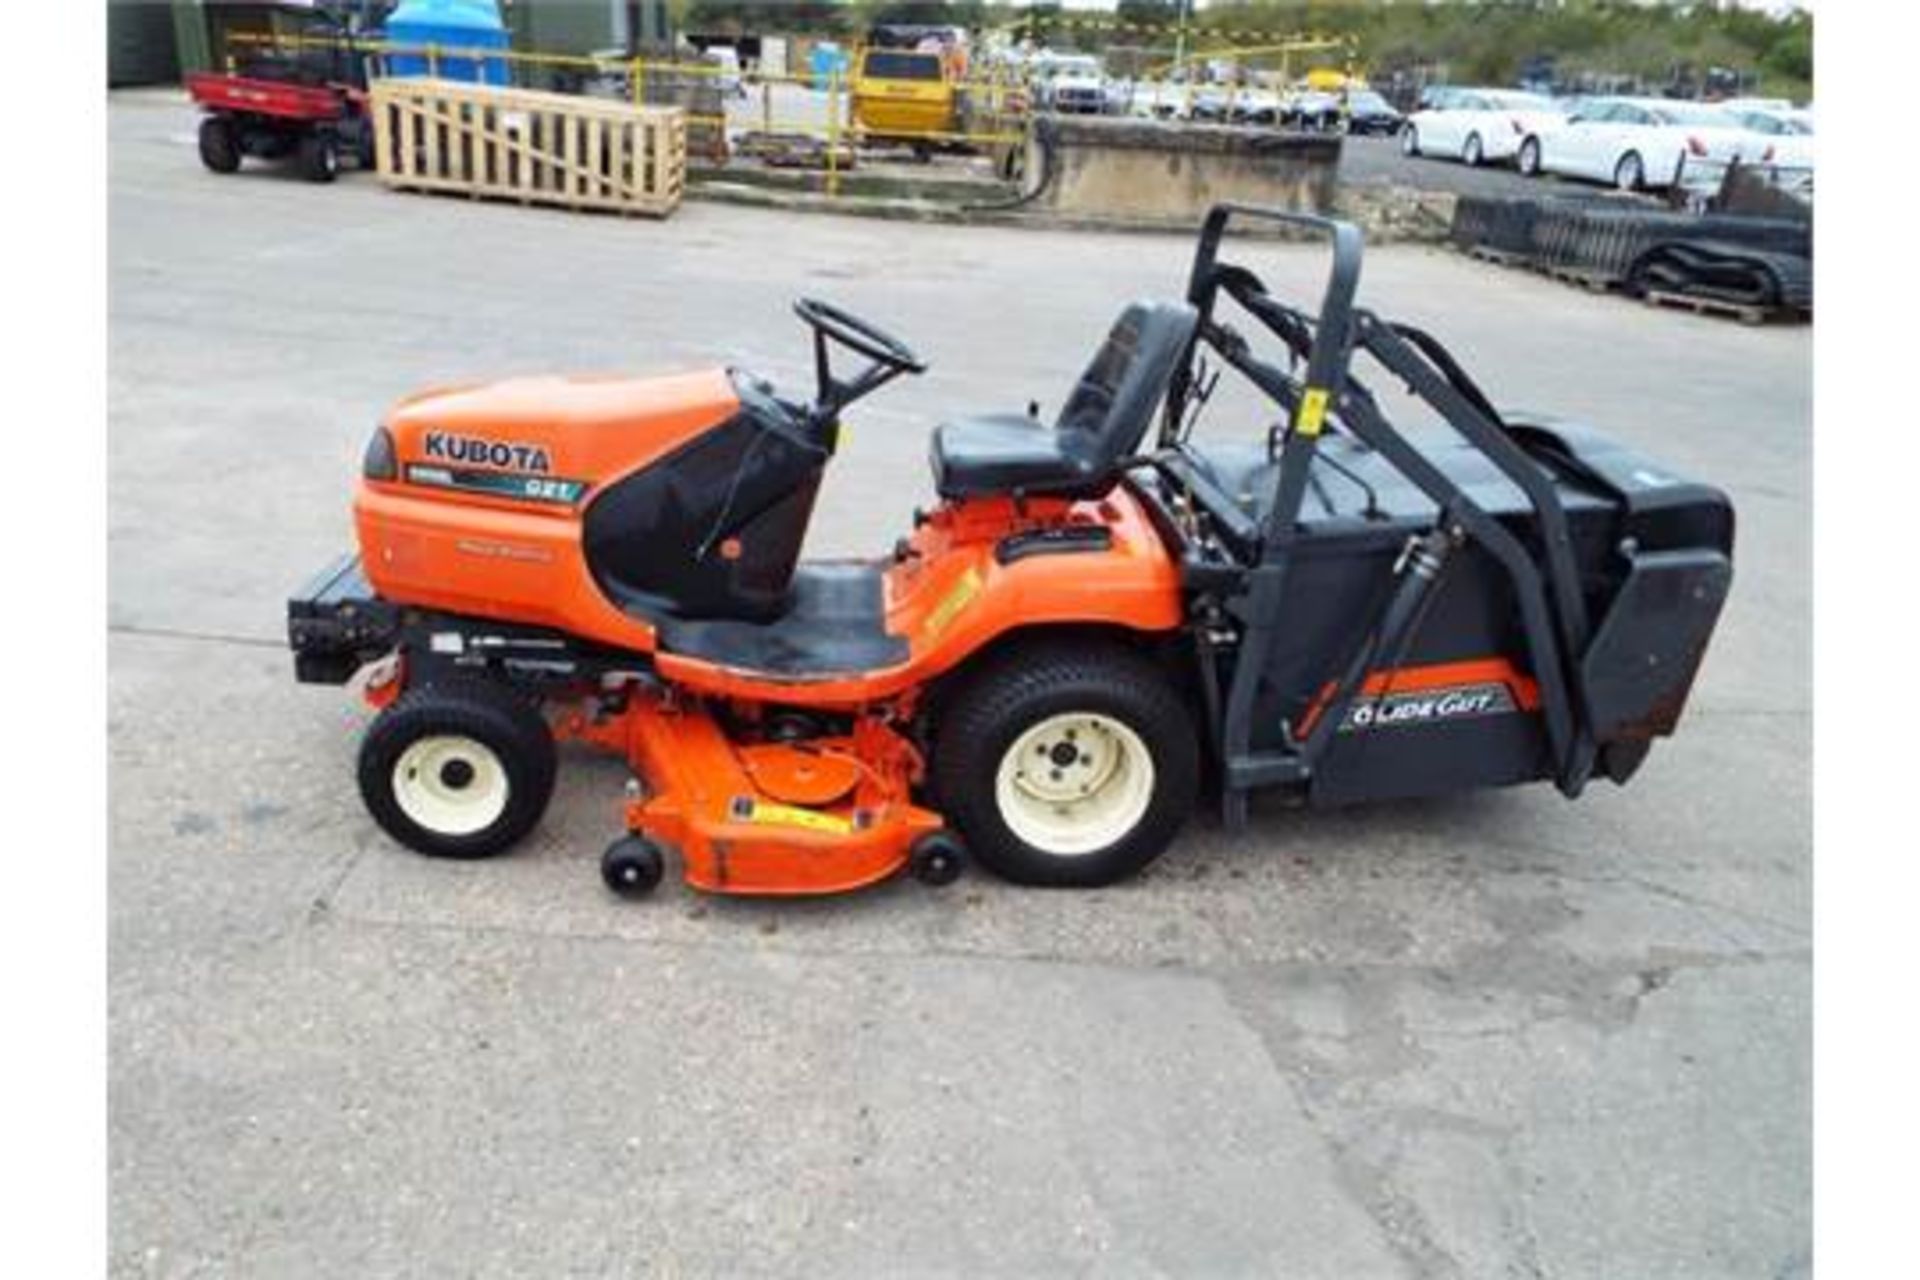 2008 Kubota G21 Ride On Mower with Glide-Cut System and High Dump Grass Collector - Image 4 of 22